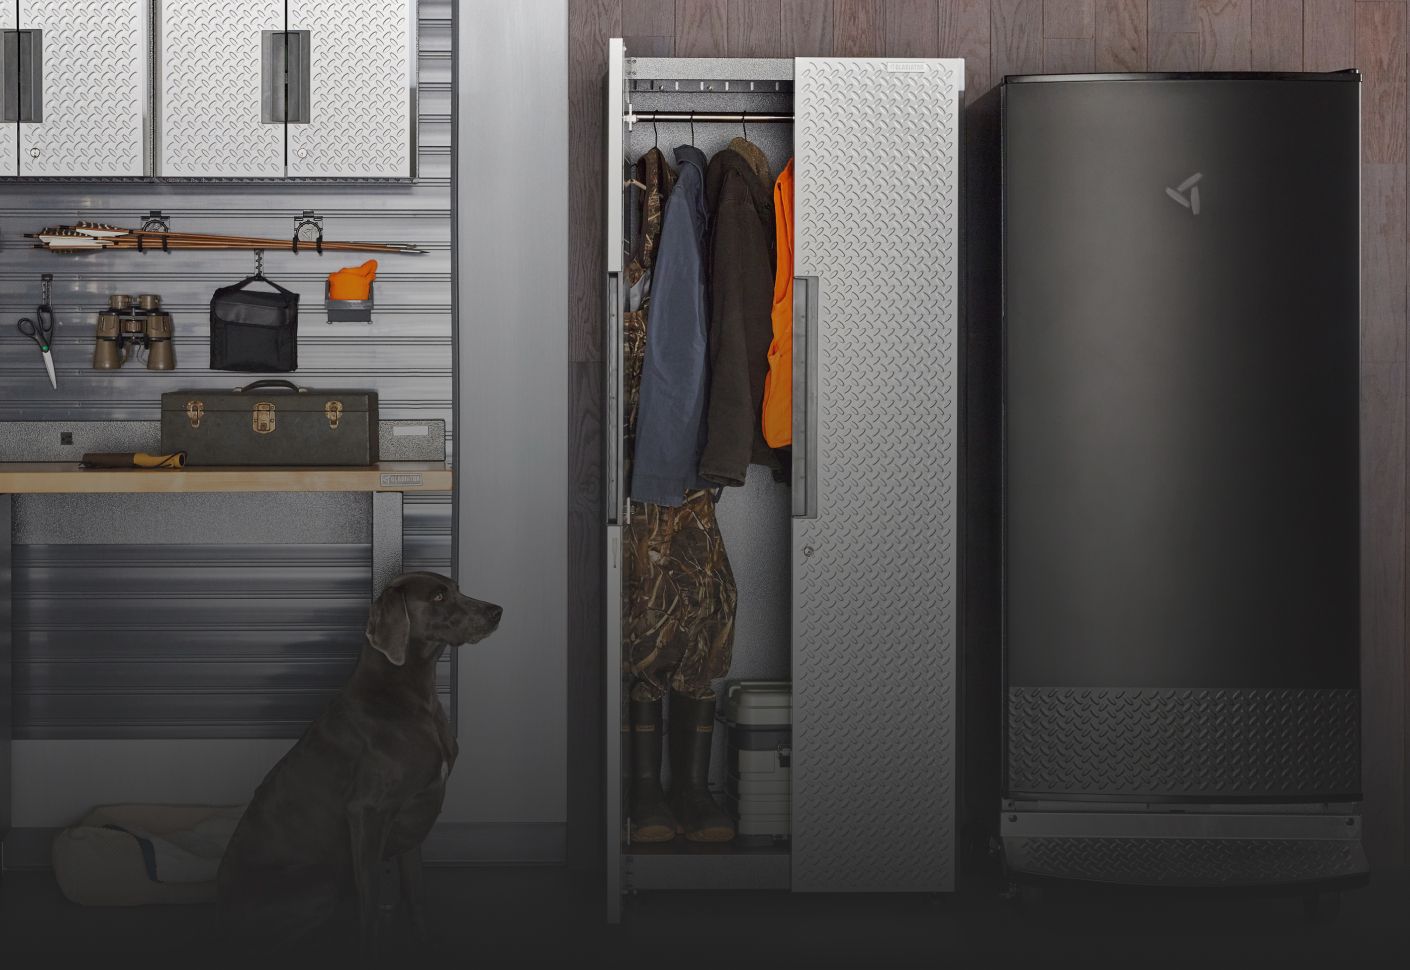 A garage with a sitting dog. A Gladiator Cabinet with one door opened. Inside are hanging jackets. Next to the cabinet is a Gladiator Garage Refrigerator